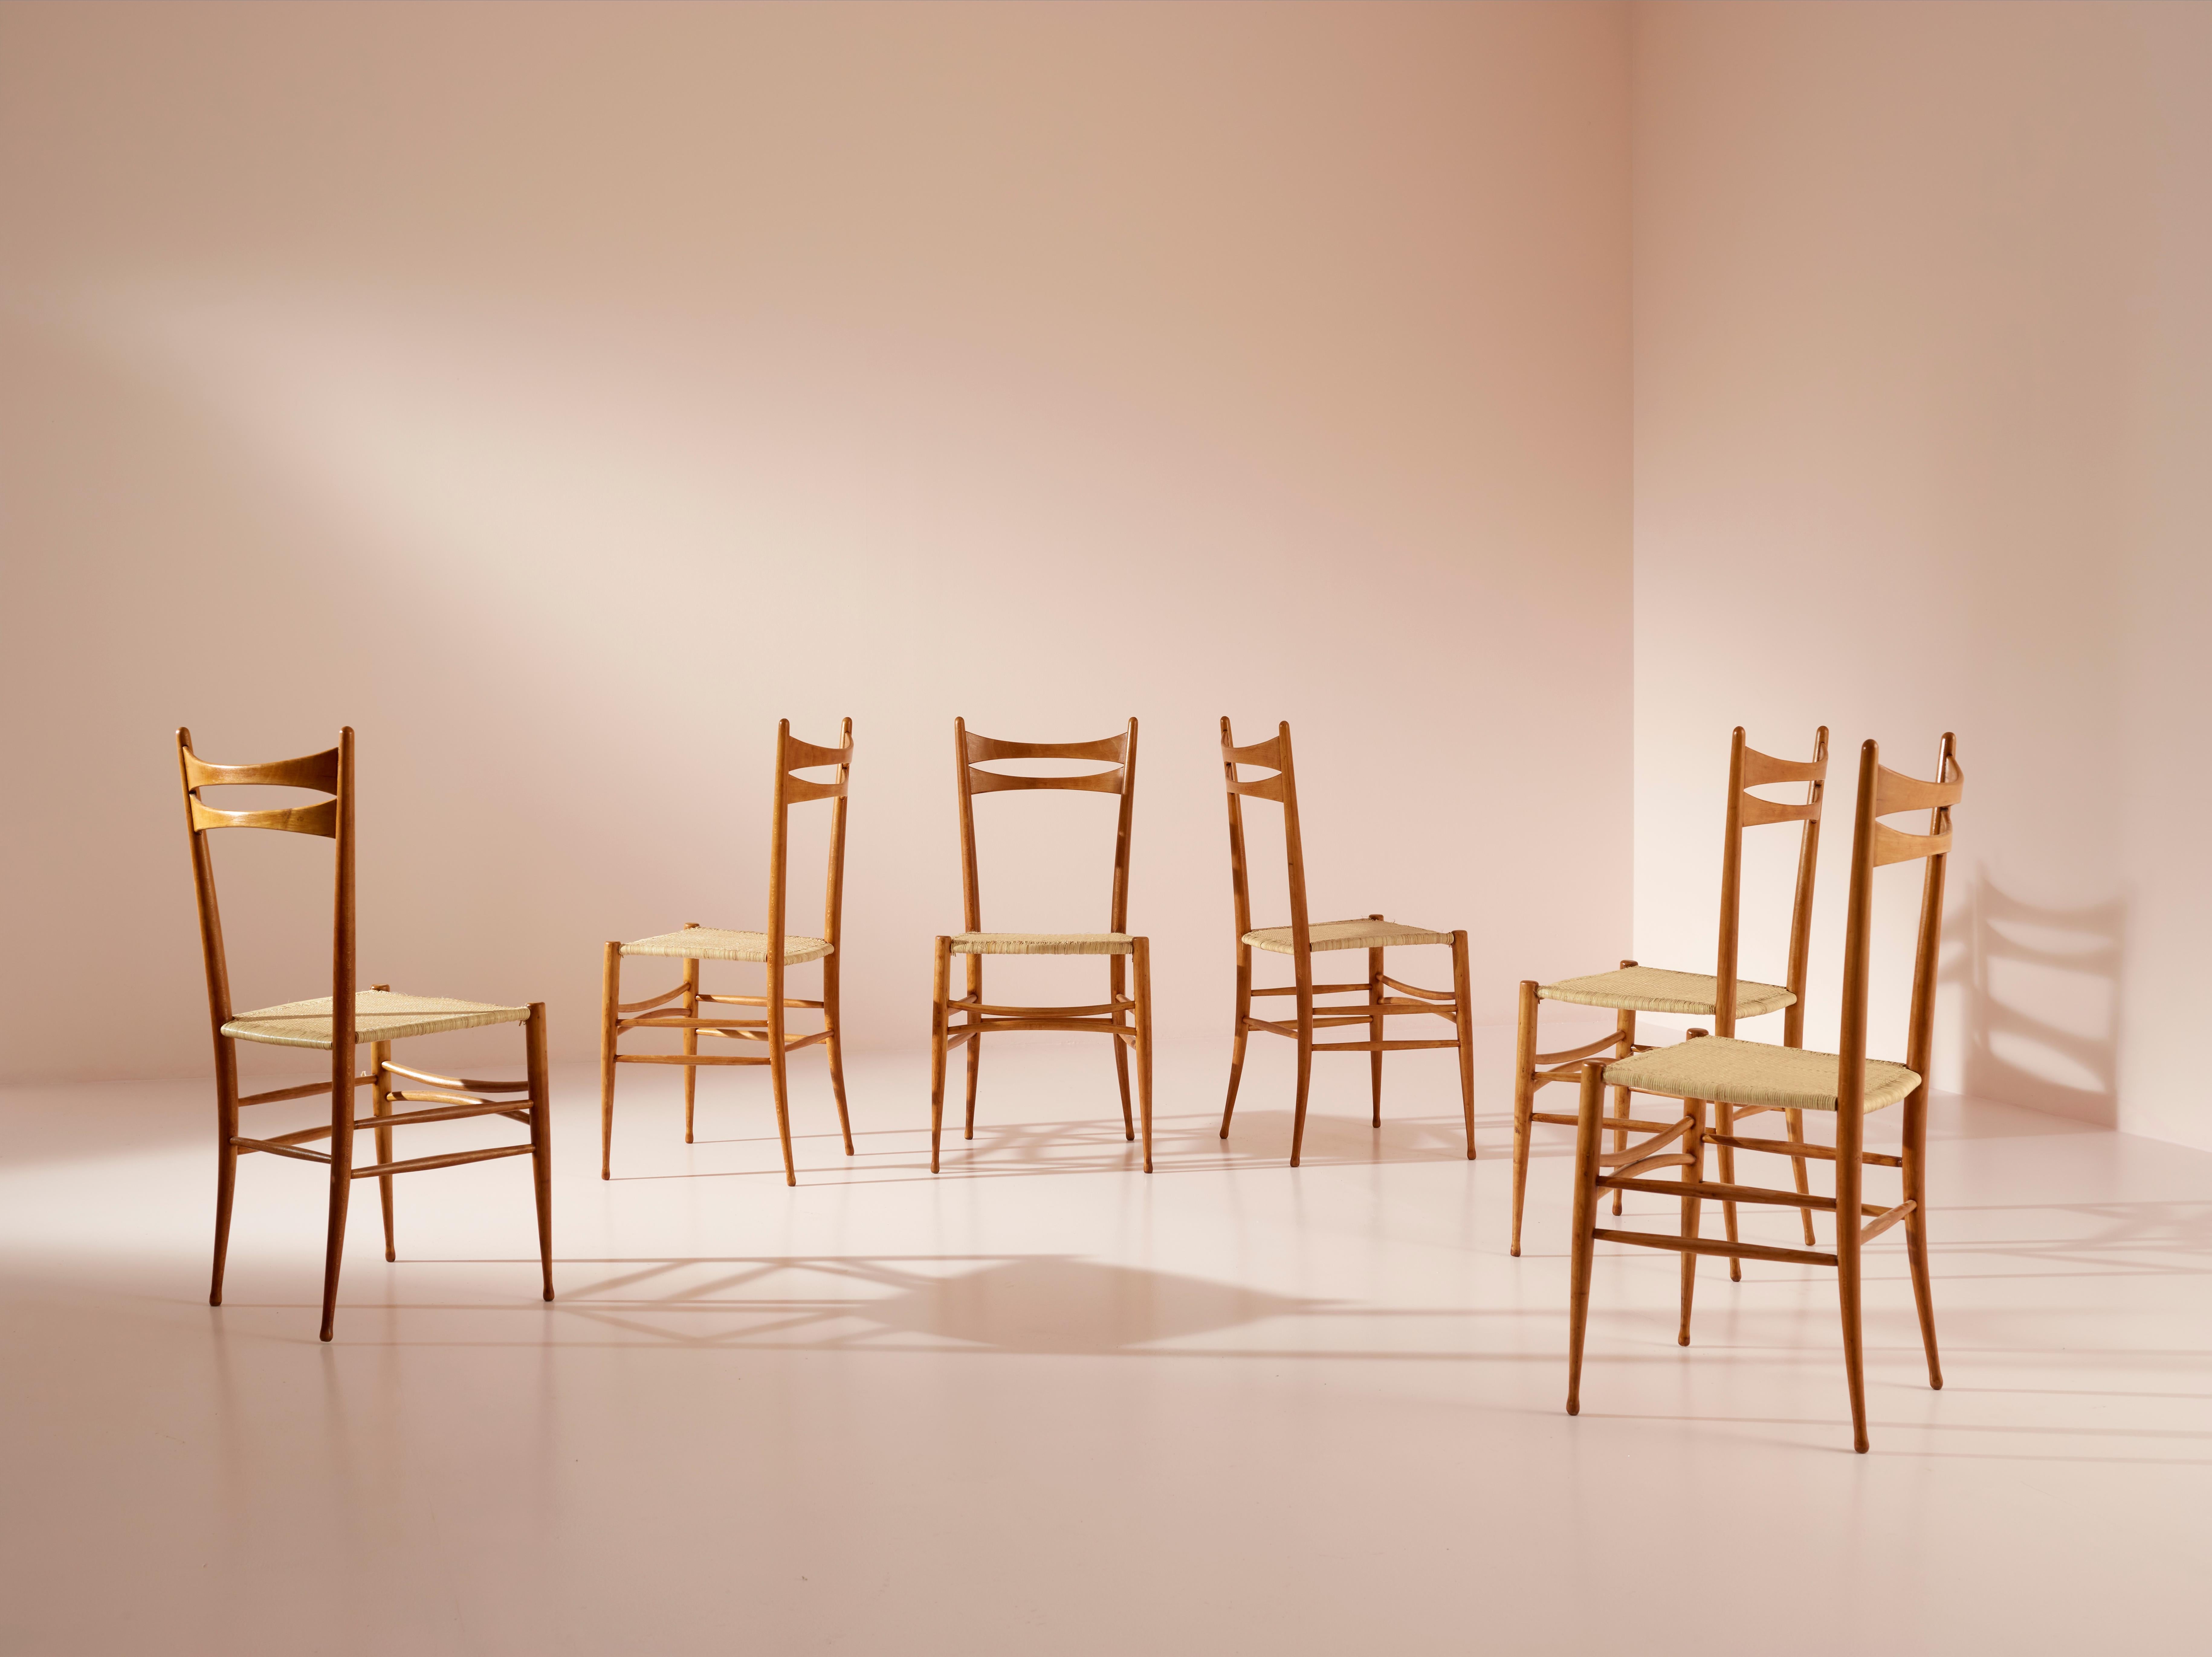 Emanuele Rambaldi set of six beech and straw chairs by Chiappe, Chiavari, 1940s For Sale 1